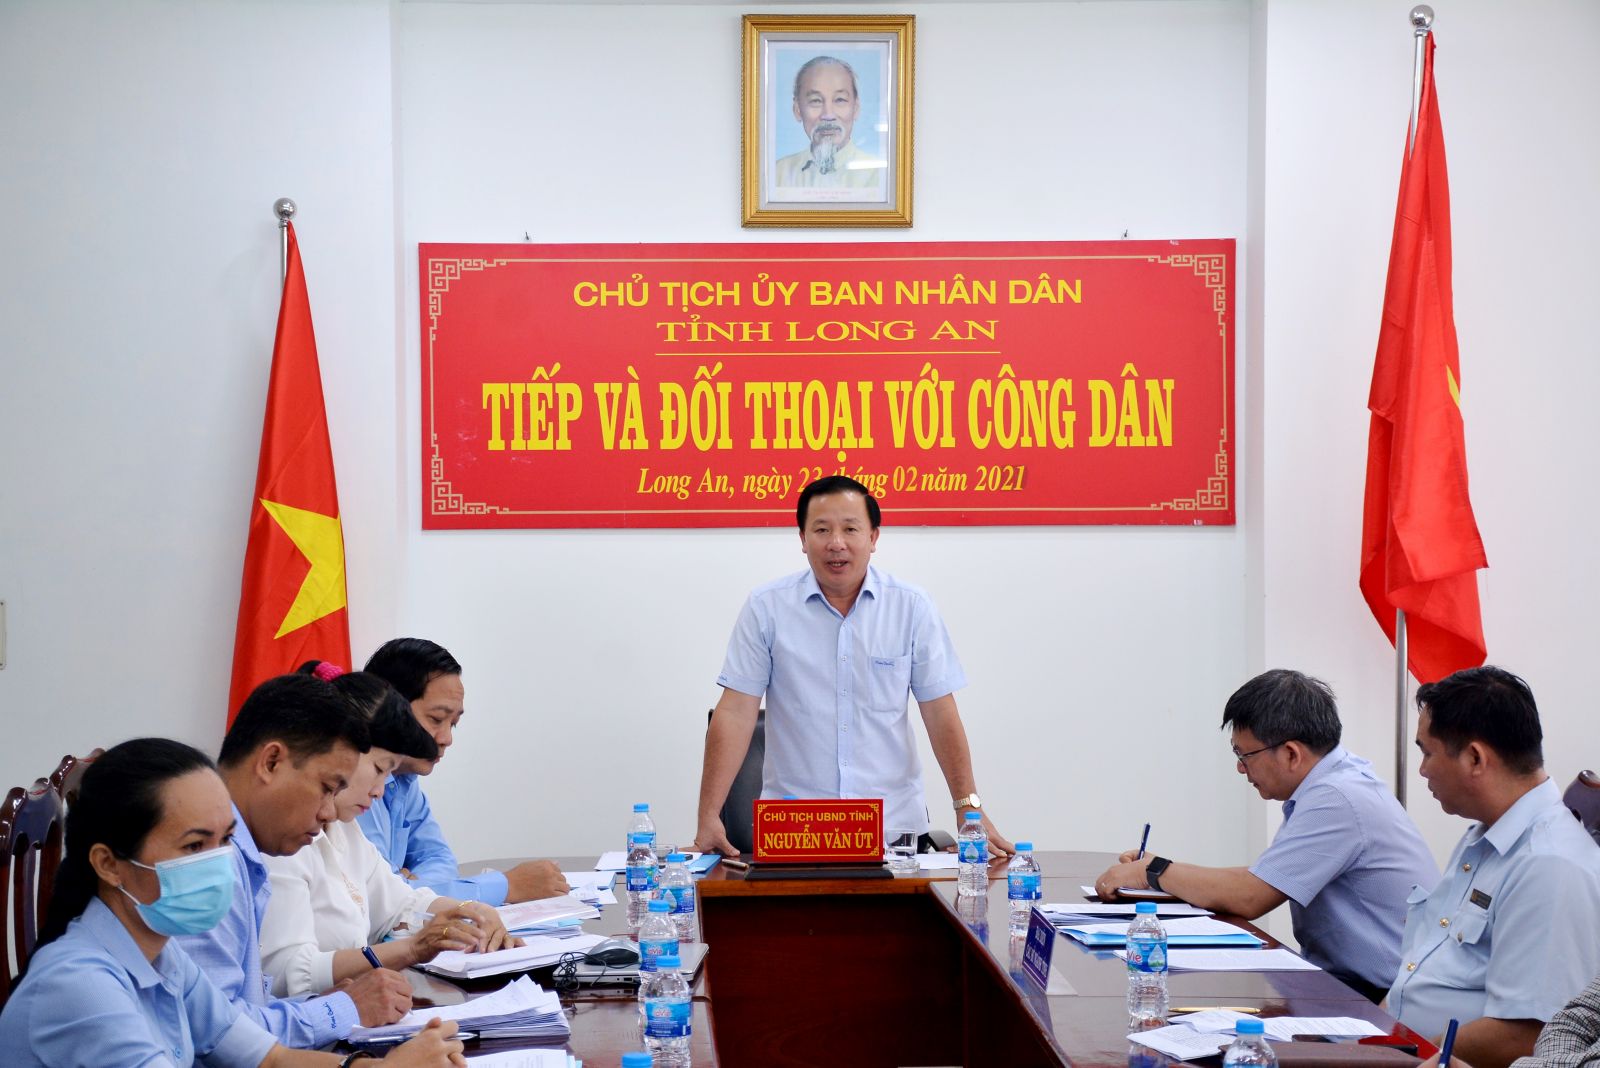 Chairman of the Provincial People's Committee - Nguyen Van Ut speaks at the dialogue